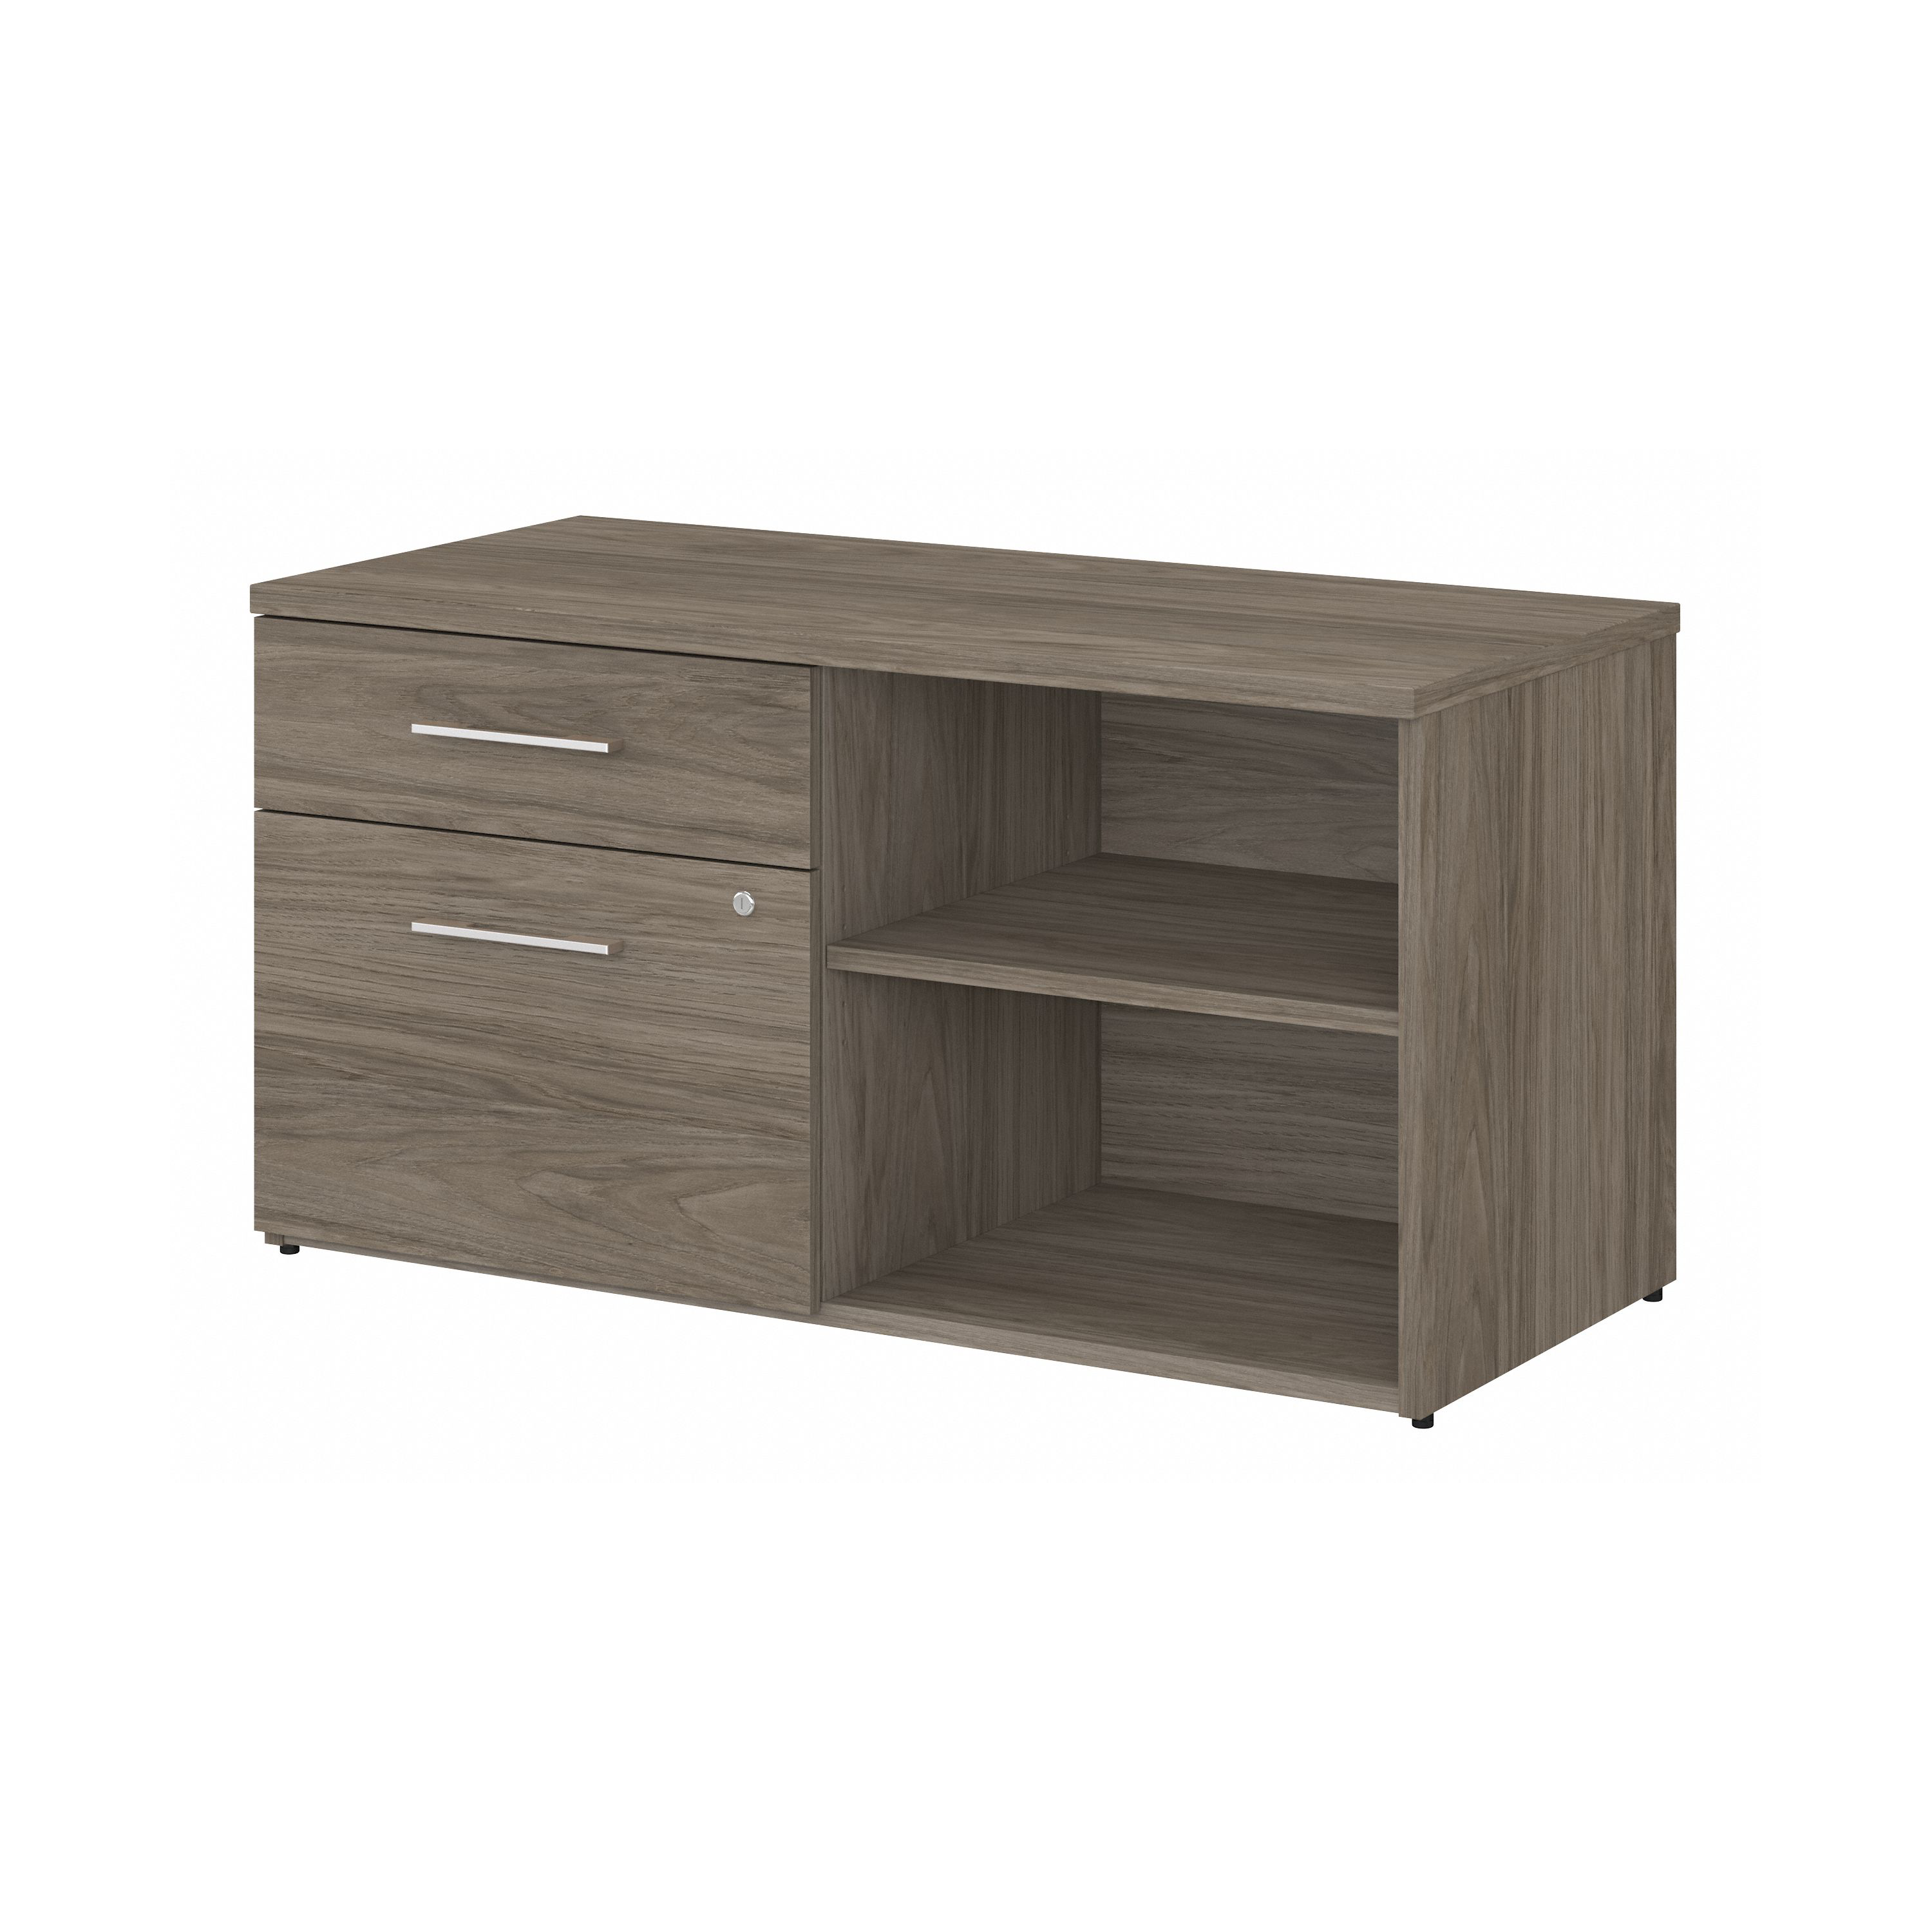 Shop Bush Business Furniture Office 500 Low Storage Cabinet with Drawers and Shelves 02 OFS145MH #color_modern hickory